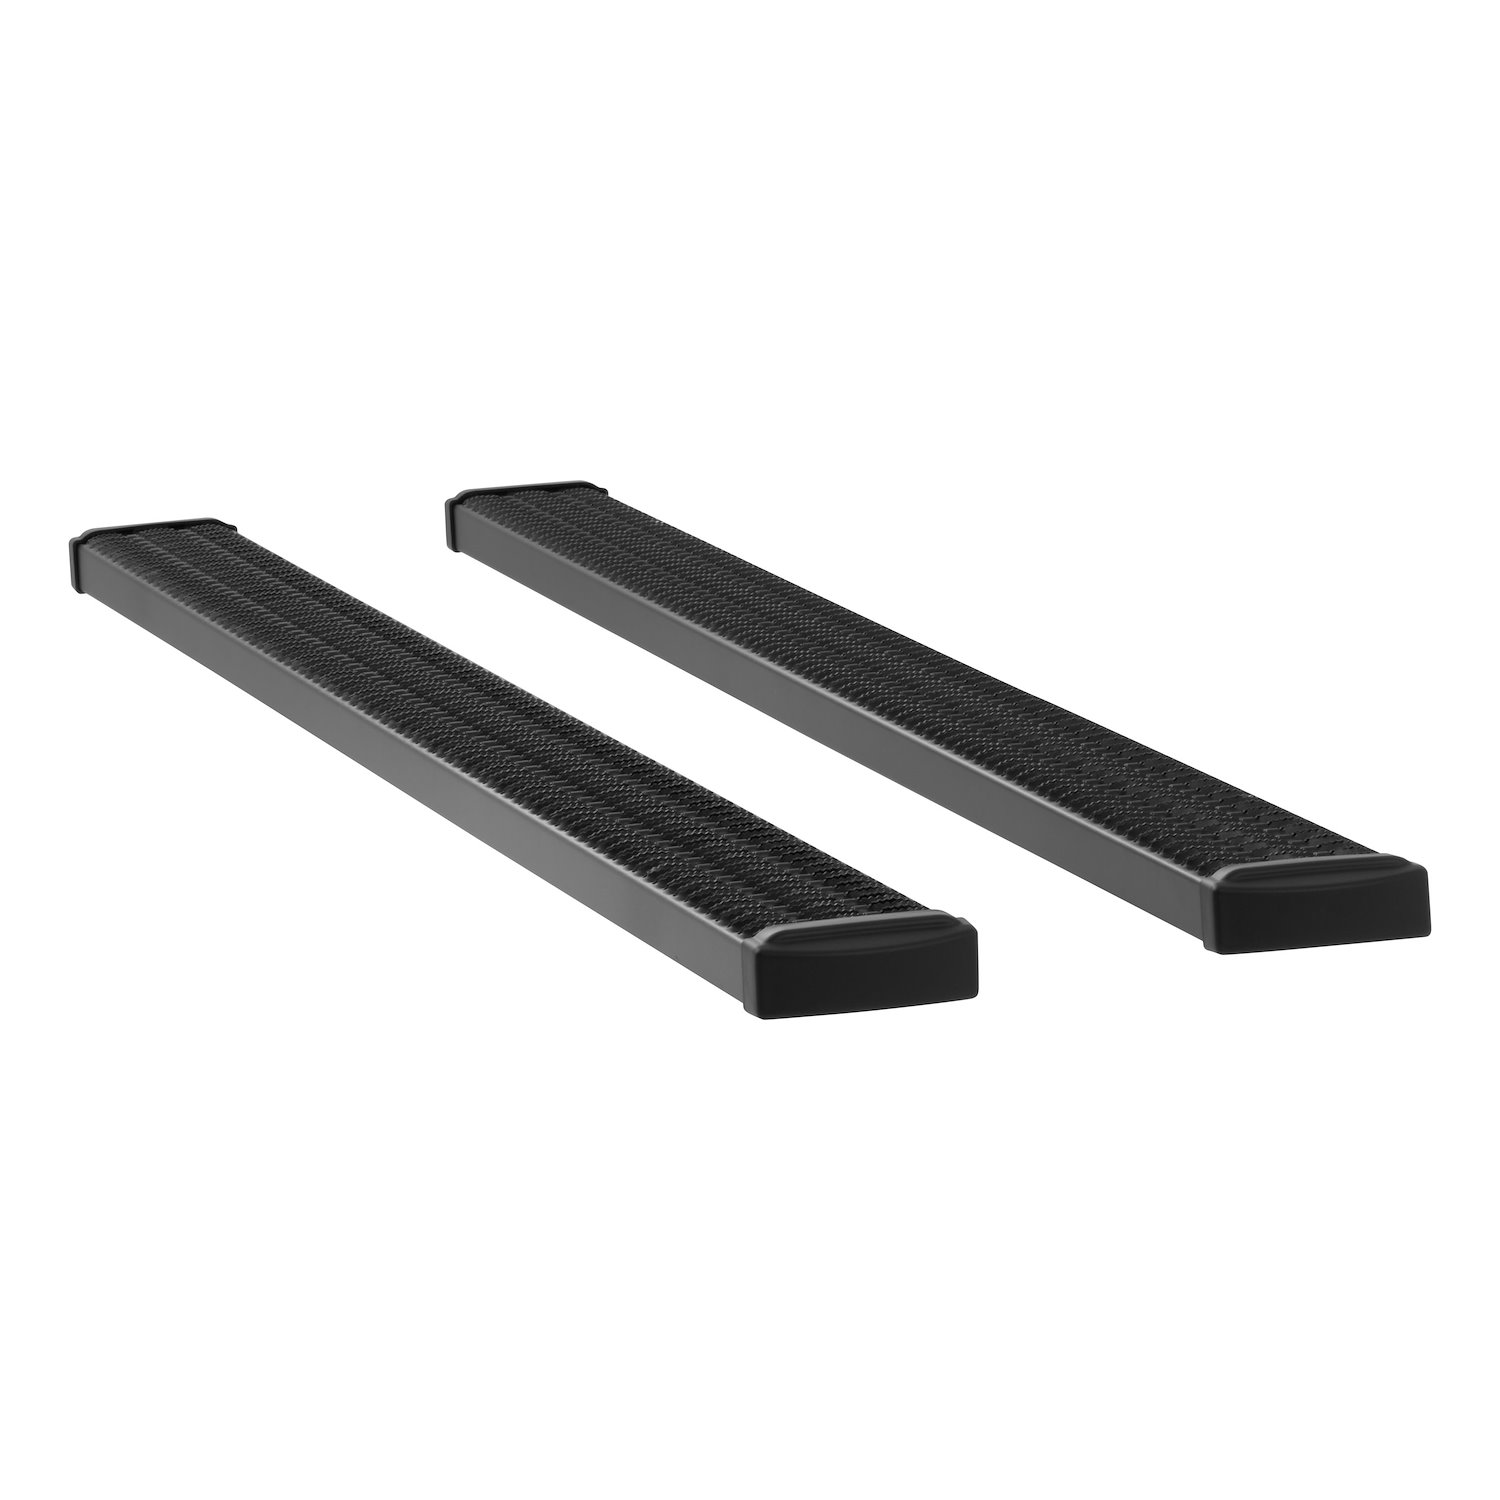 415098-401339 Grip Step 7 in. x 98 in. Aluminum Wheel-to-Wheel Running Boards Fits Select Ram 3500